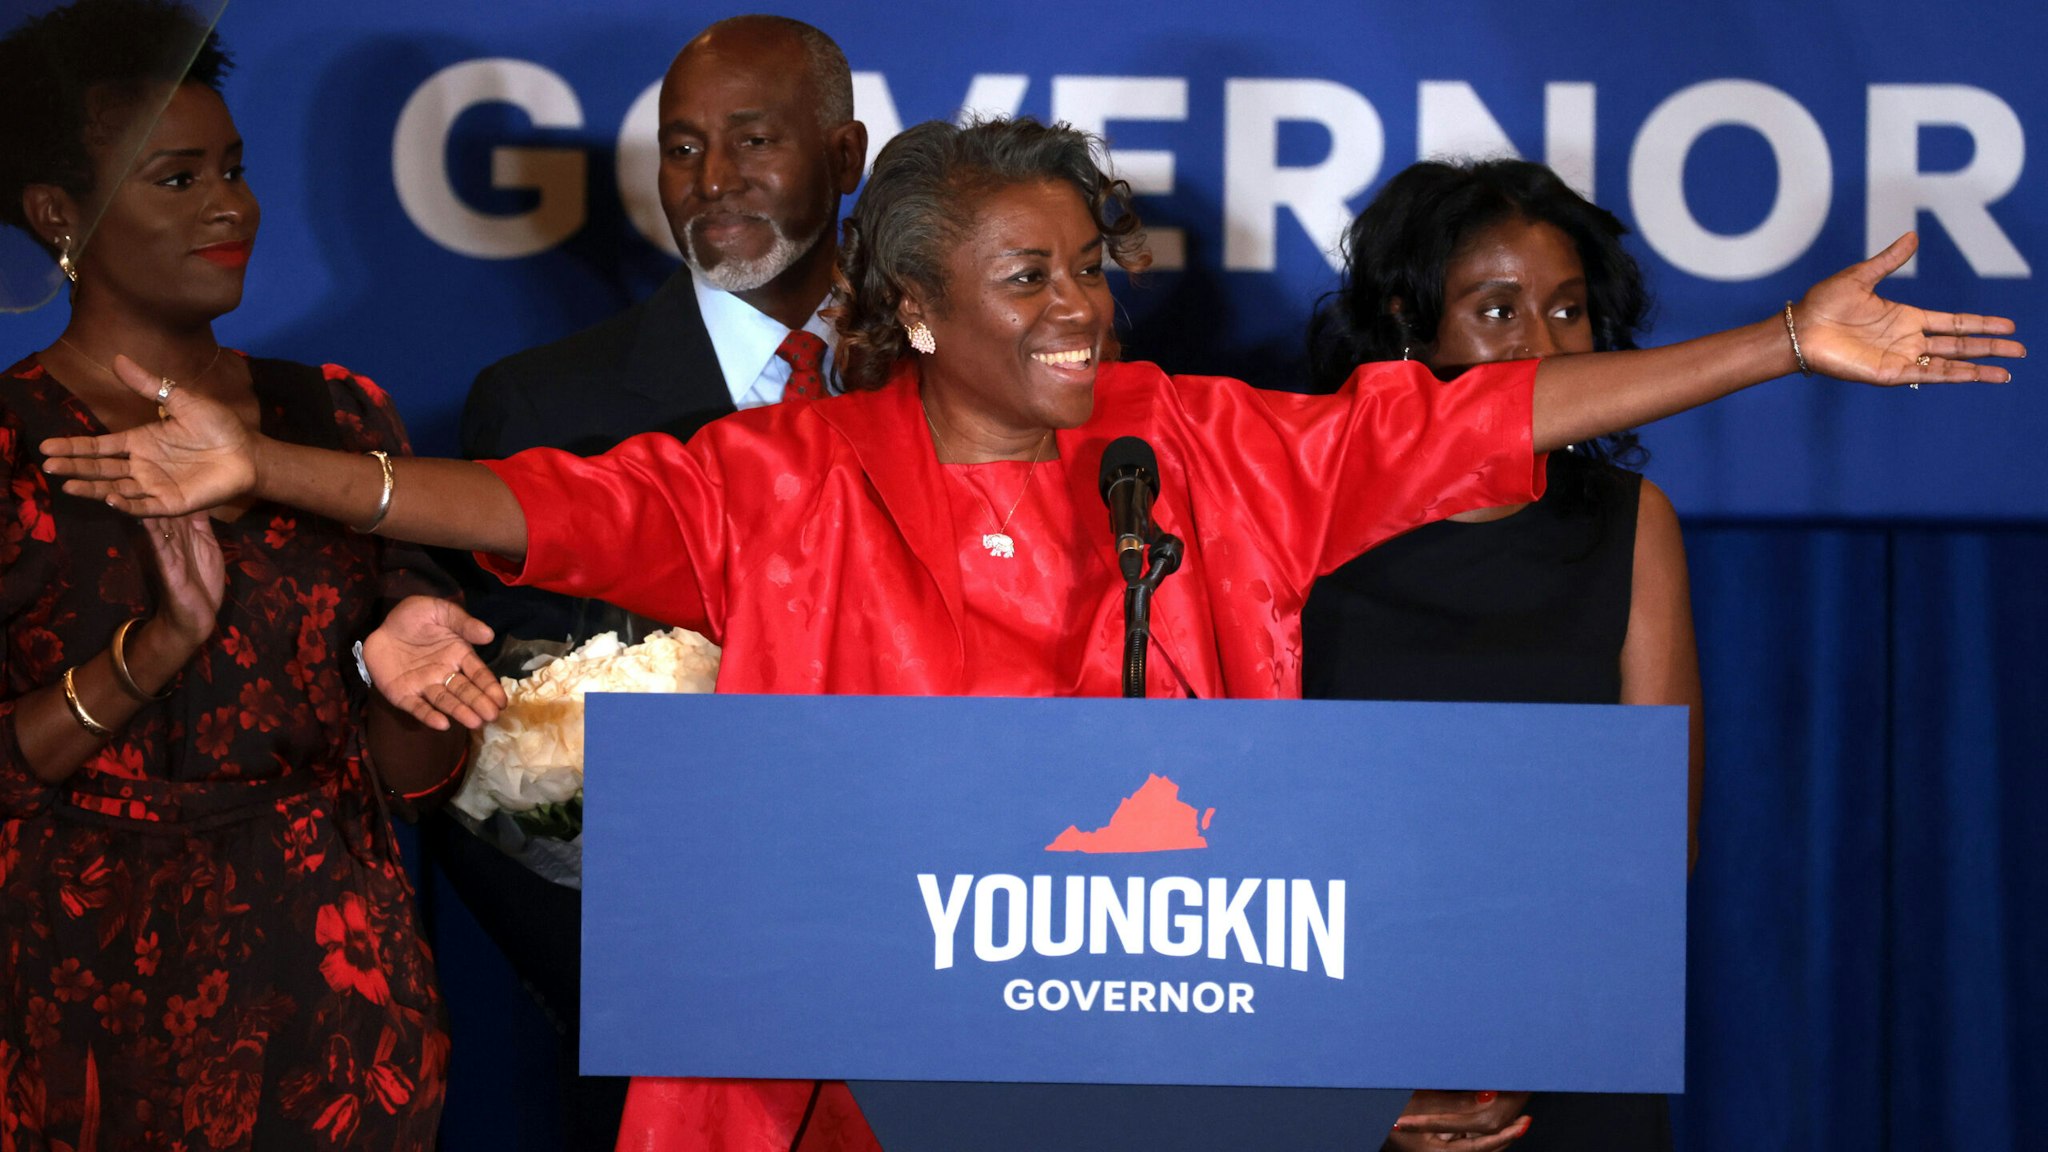 CHANTILLY, VIRGINIA - NOVEMBER 02: Virginia Republican candidate for lieutenant governor Winsome Sears takes the stage with her family during an election night rally at the Westfields Marriott Washington Dulles on November 02, 2021 in Chantilly, Virginia. Virginians went to the polls Tuesday to vote in the gubernatorial race that pitted Republican gubernatorial candidate Glenn Youngkin against Democratic gubernatorial candidate, former Virginia Gov. Terry McAuliffe.